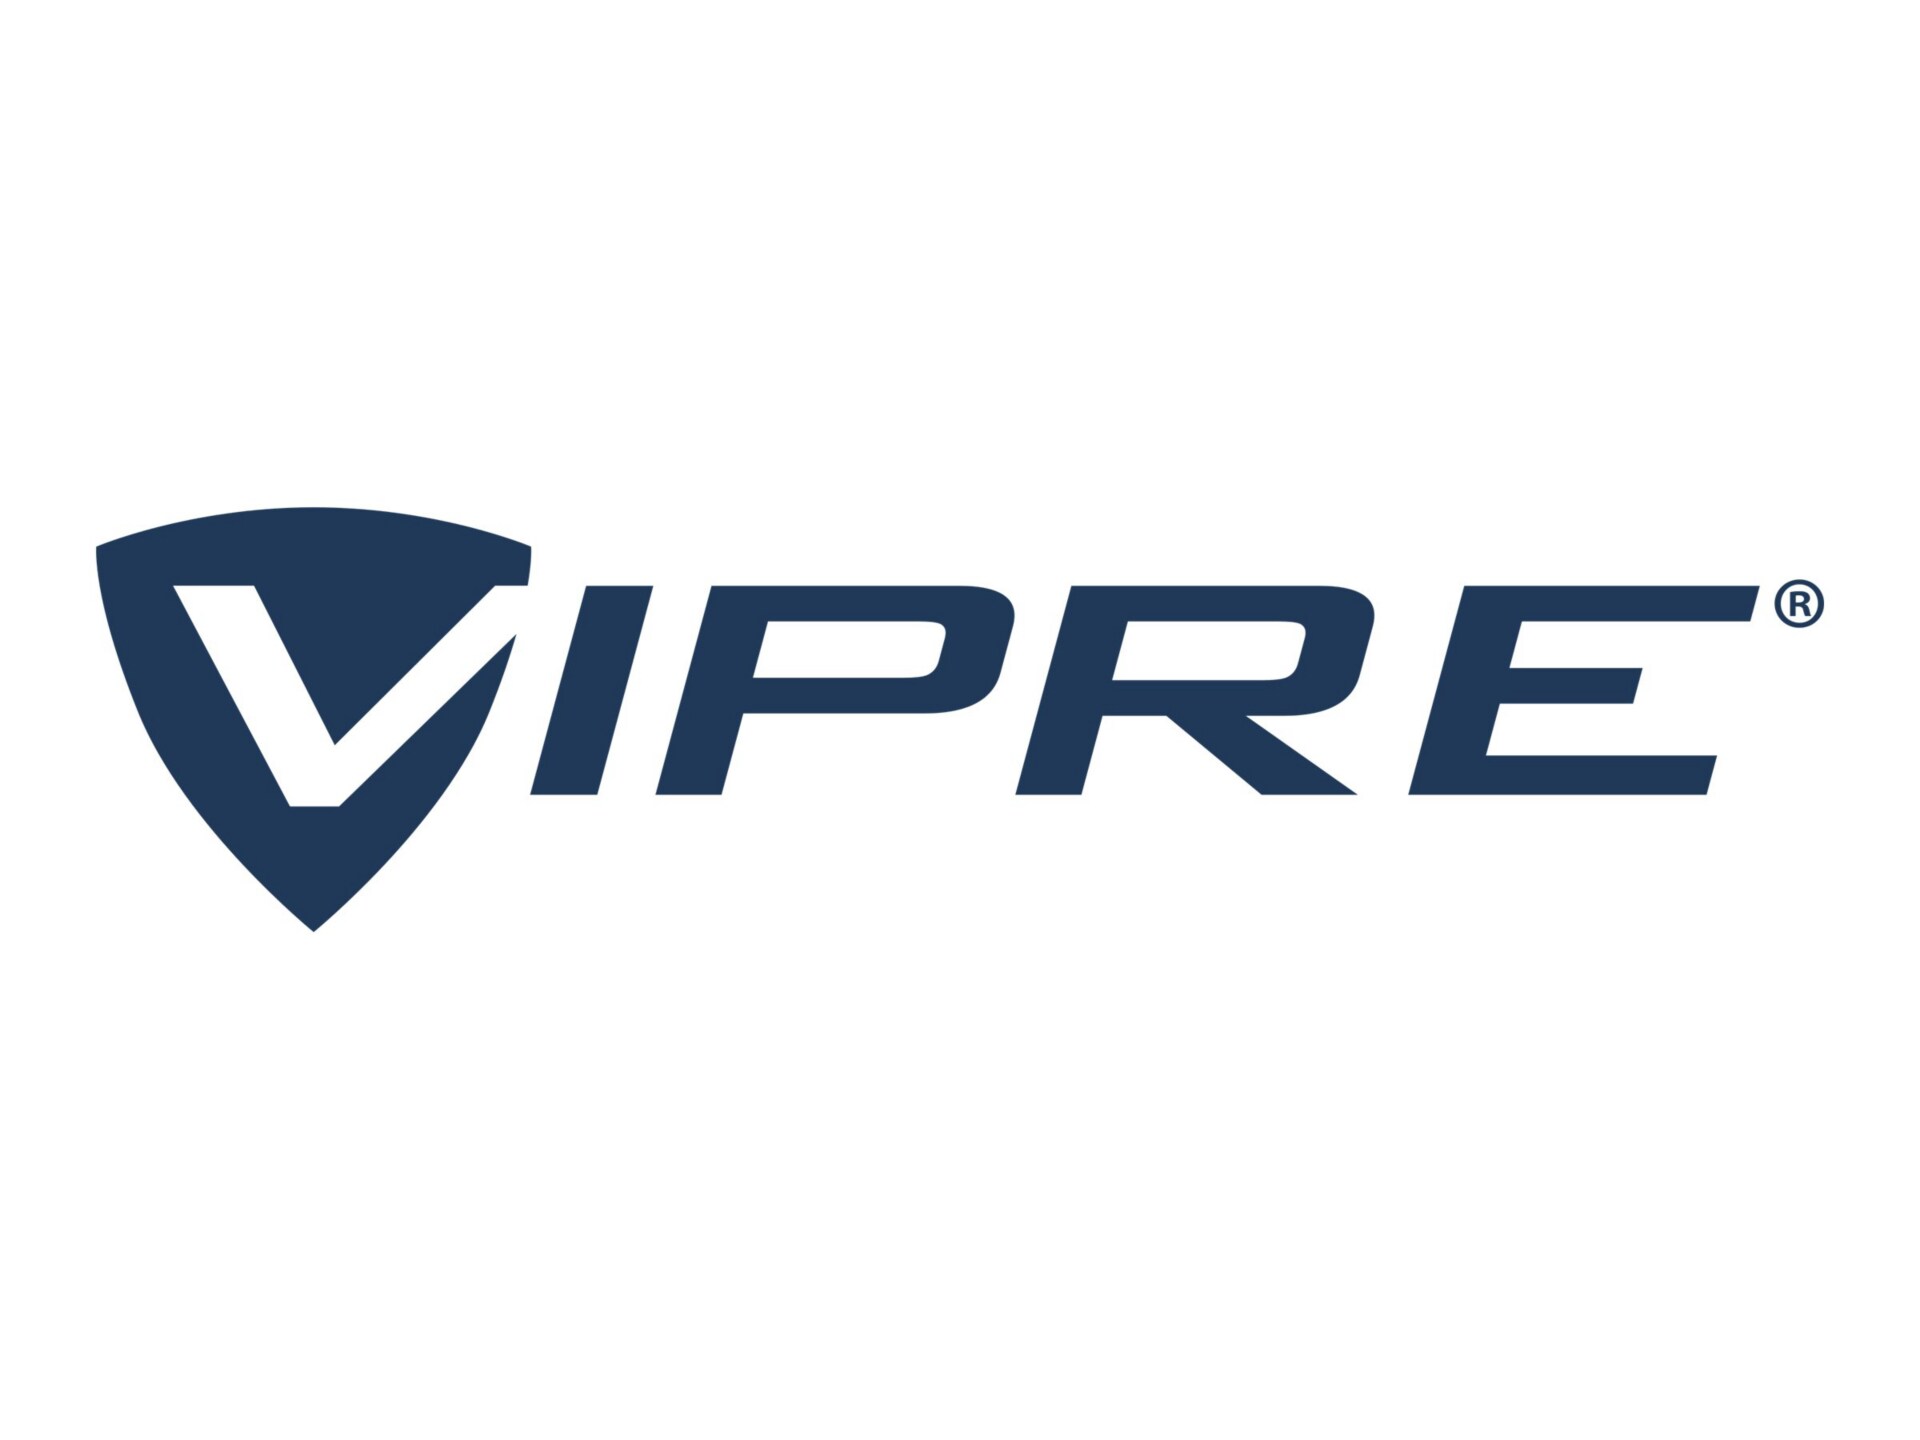 VIPRE Email Security Advanced Threat Protection - subscription license (1 y